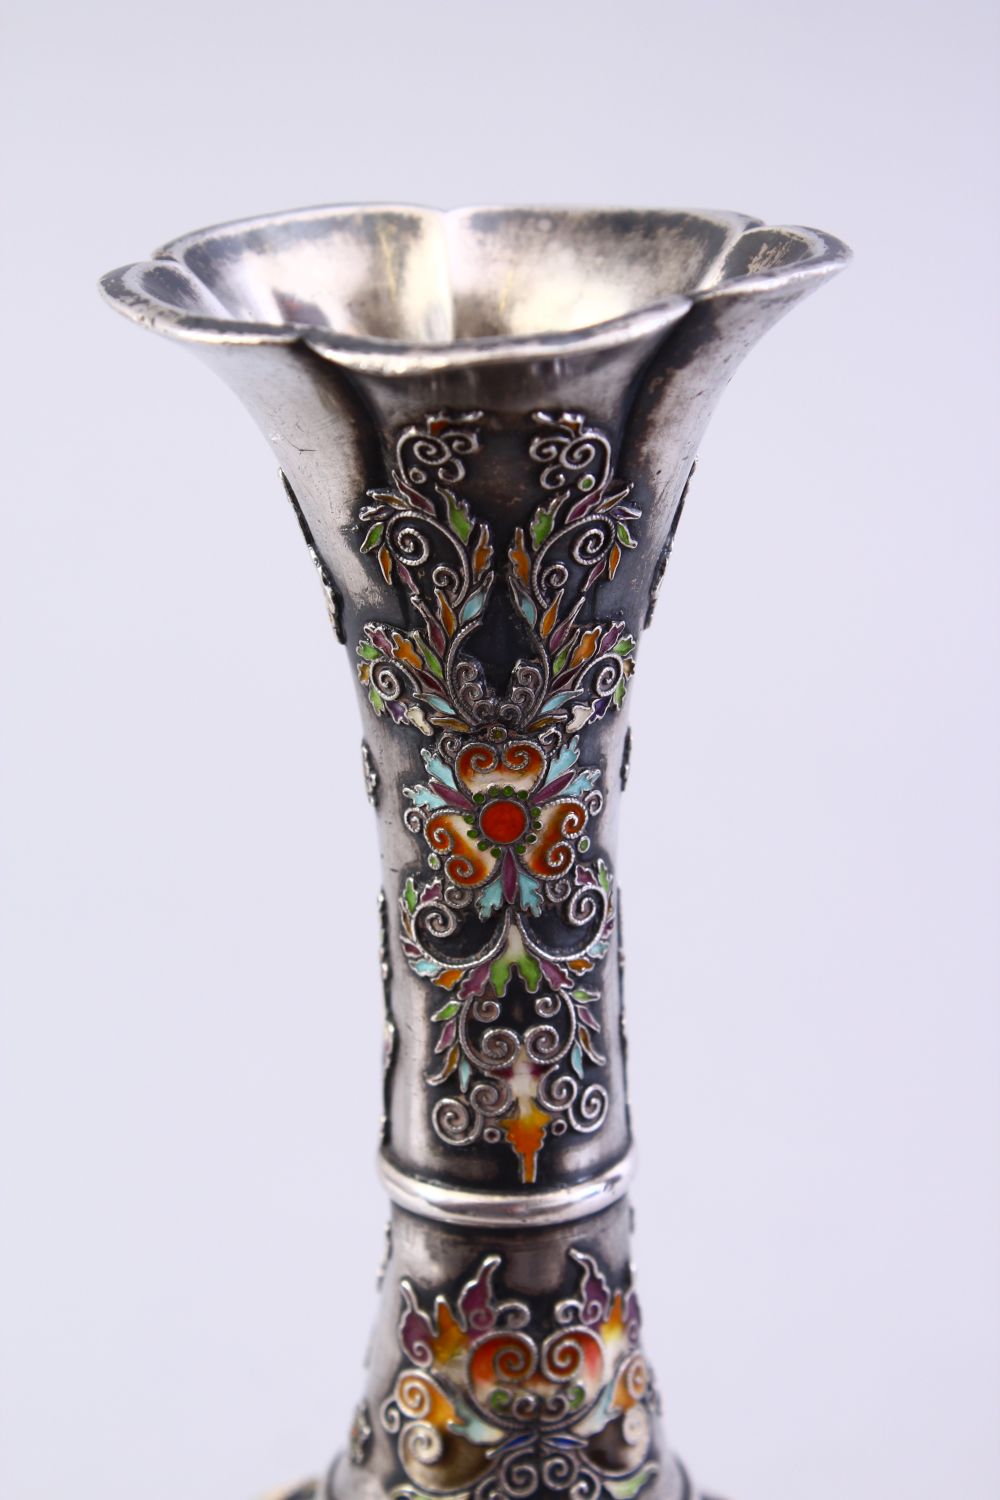 A GOOD JAPANESE MEIJI PERIOD SILVER & ENAMEL BOTTLE VASE, the vase with iris and other floral - Image 7 of 9